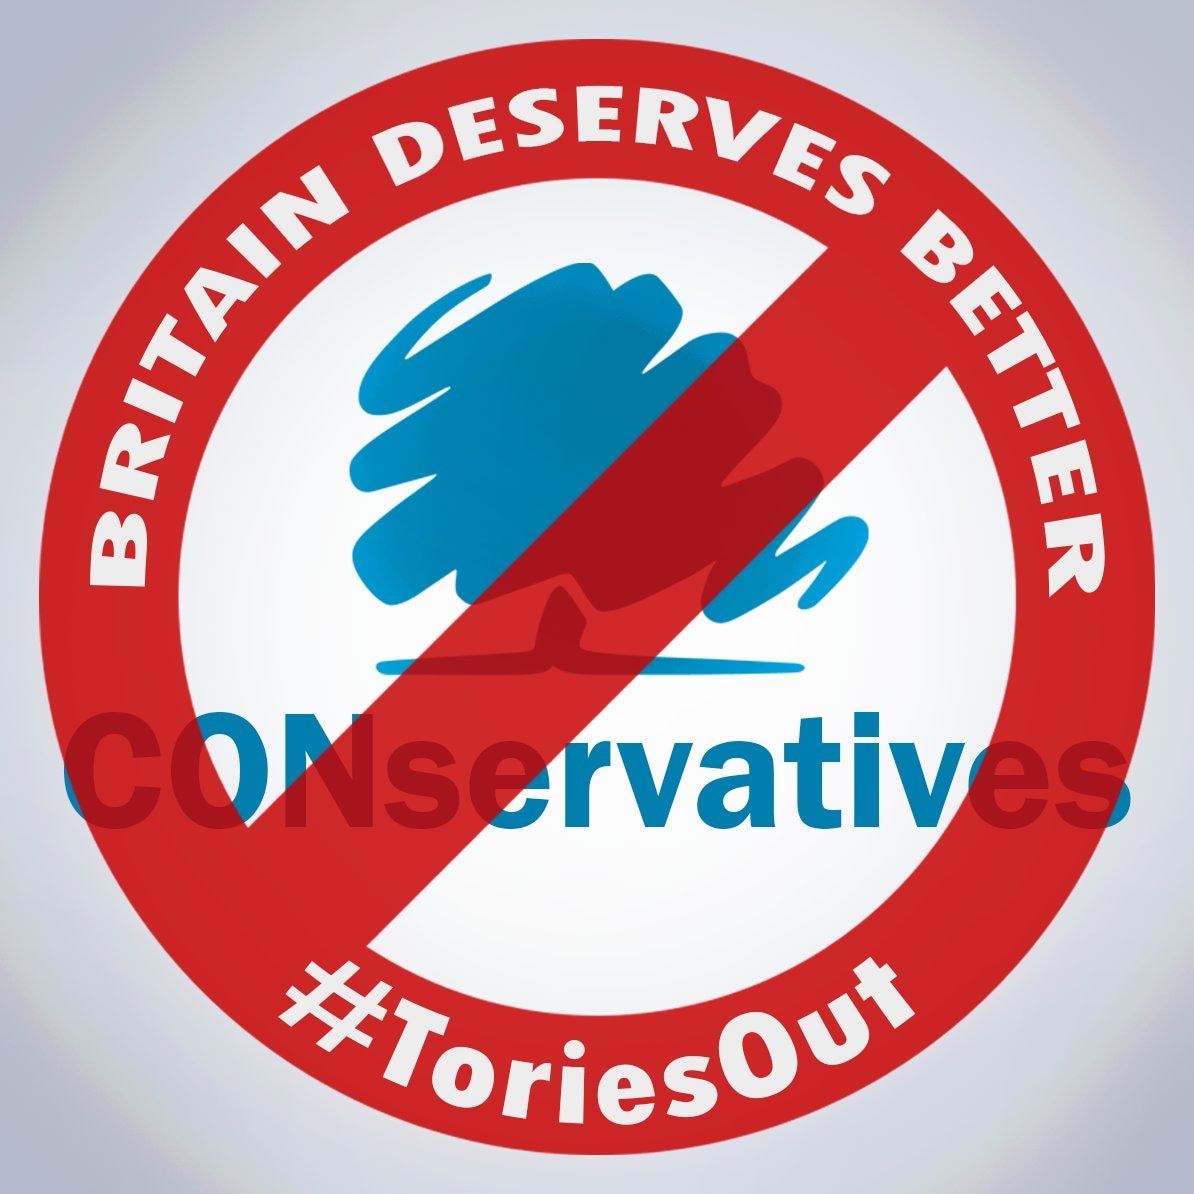 #NewProfilePic #ToriesOut5thMay #ToriesOut #GTTO